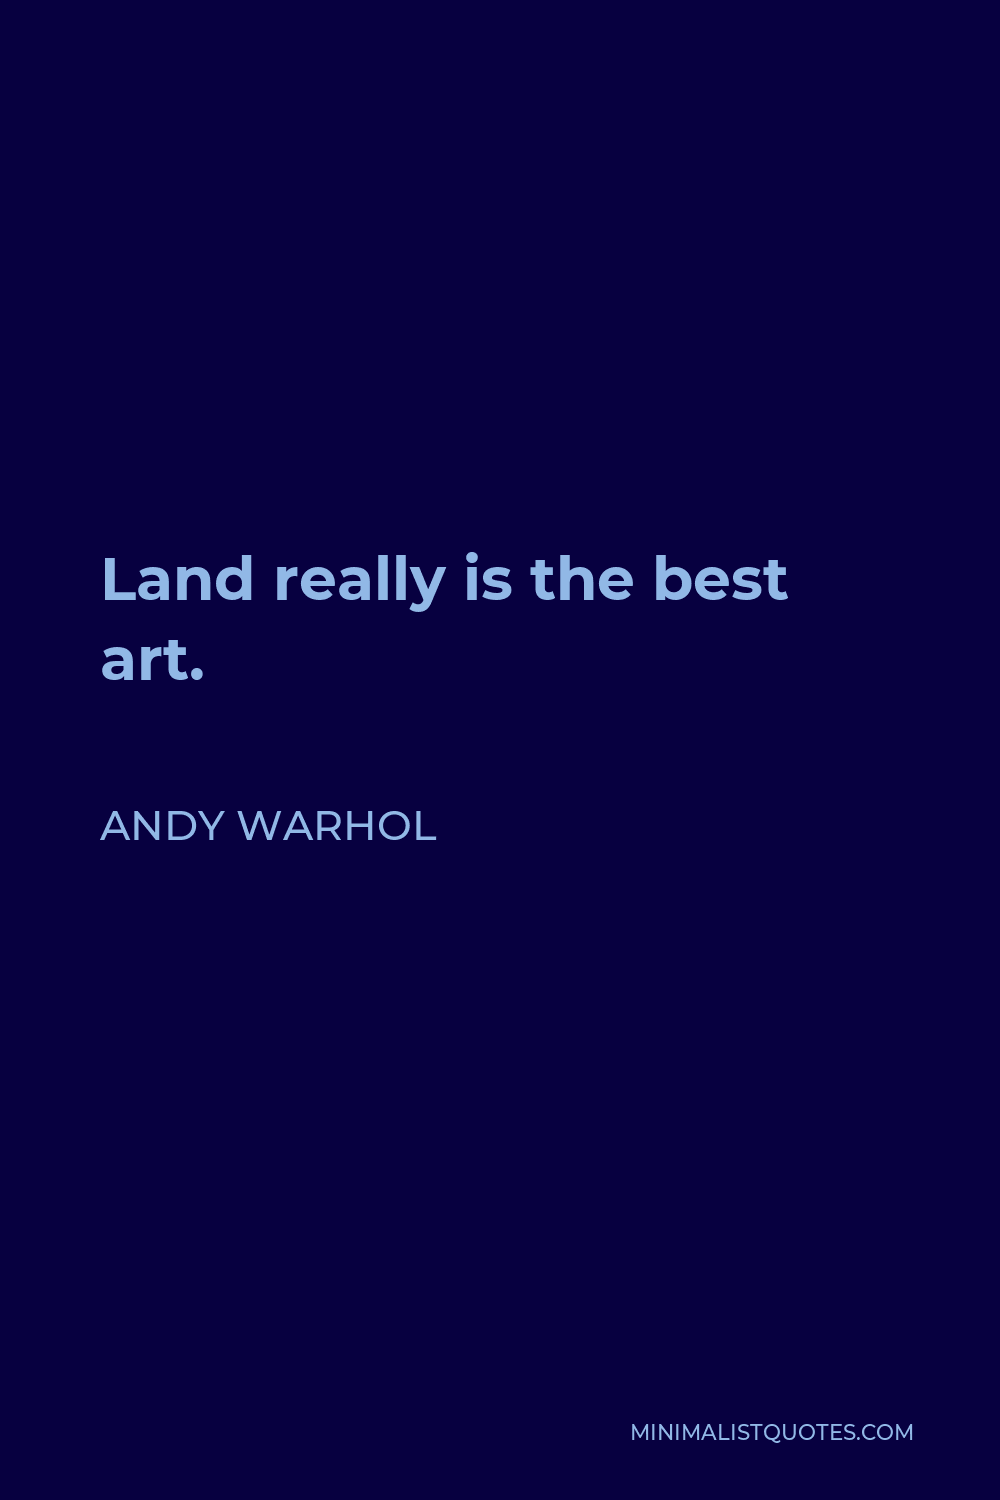 Andy Warhol Quote - Land really is the best art.